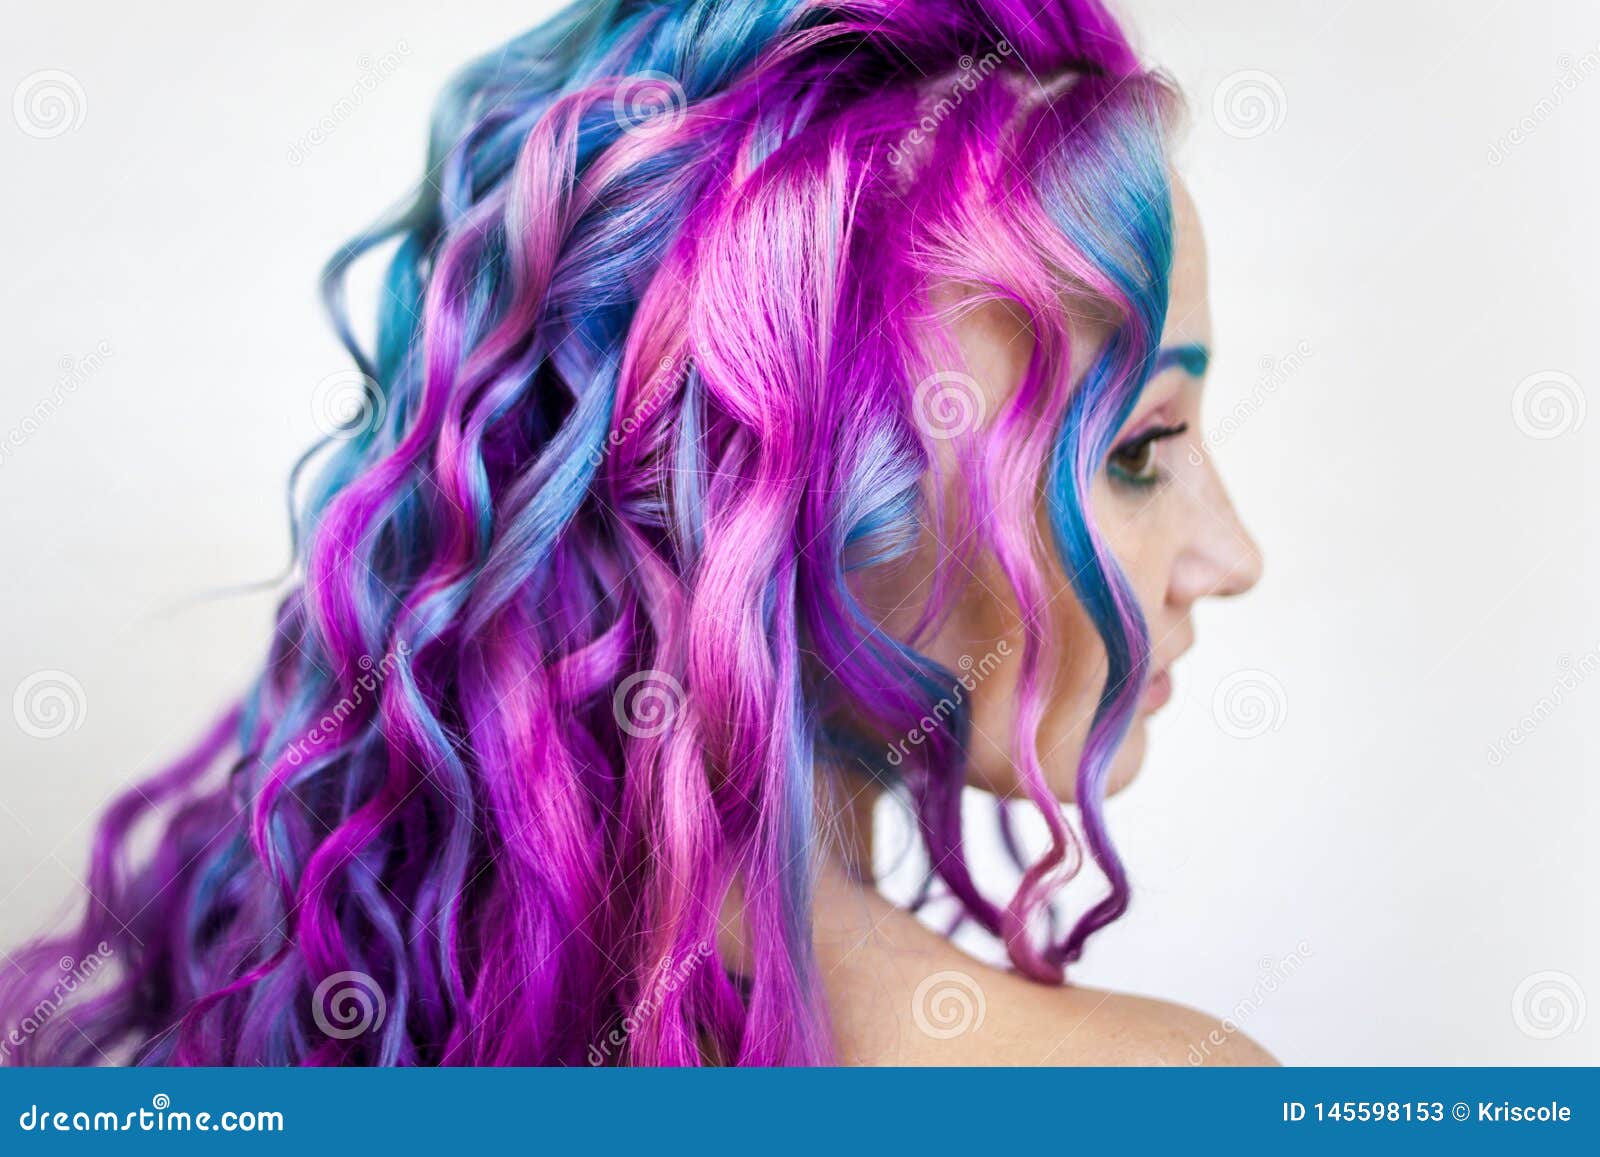 4. Pastel Blue, Purple, and Pink Hair Dye Brands - wide 1